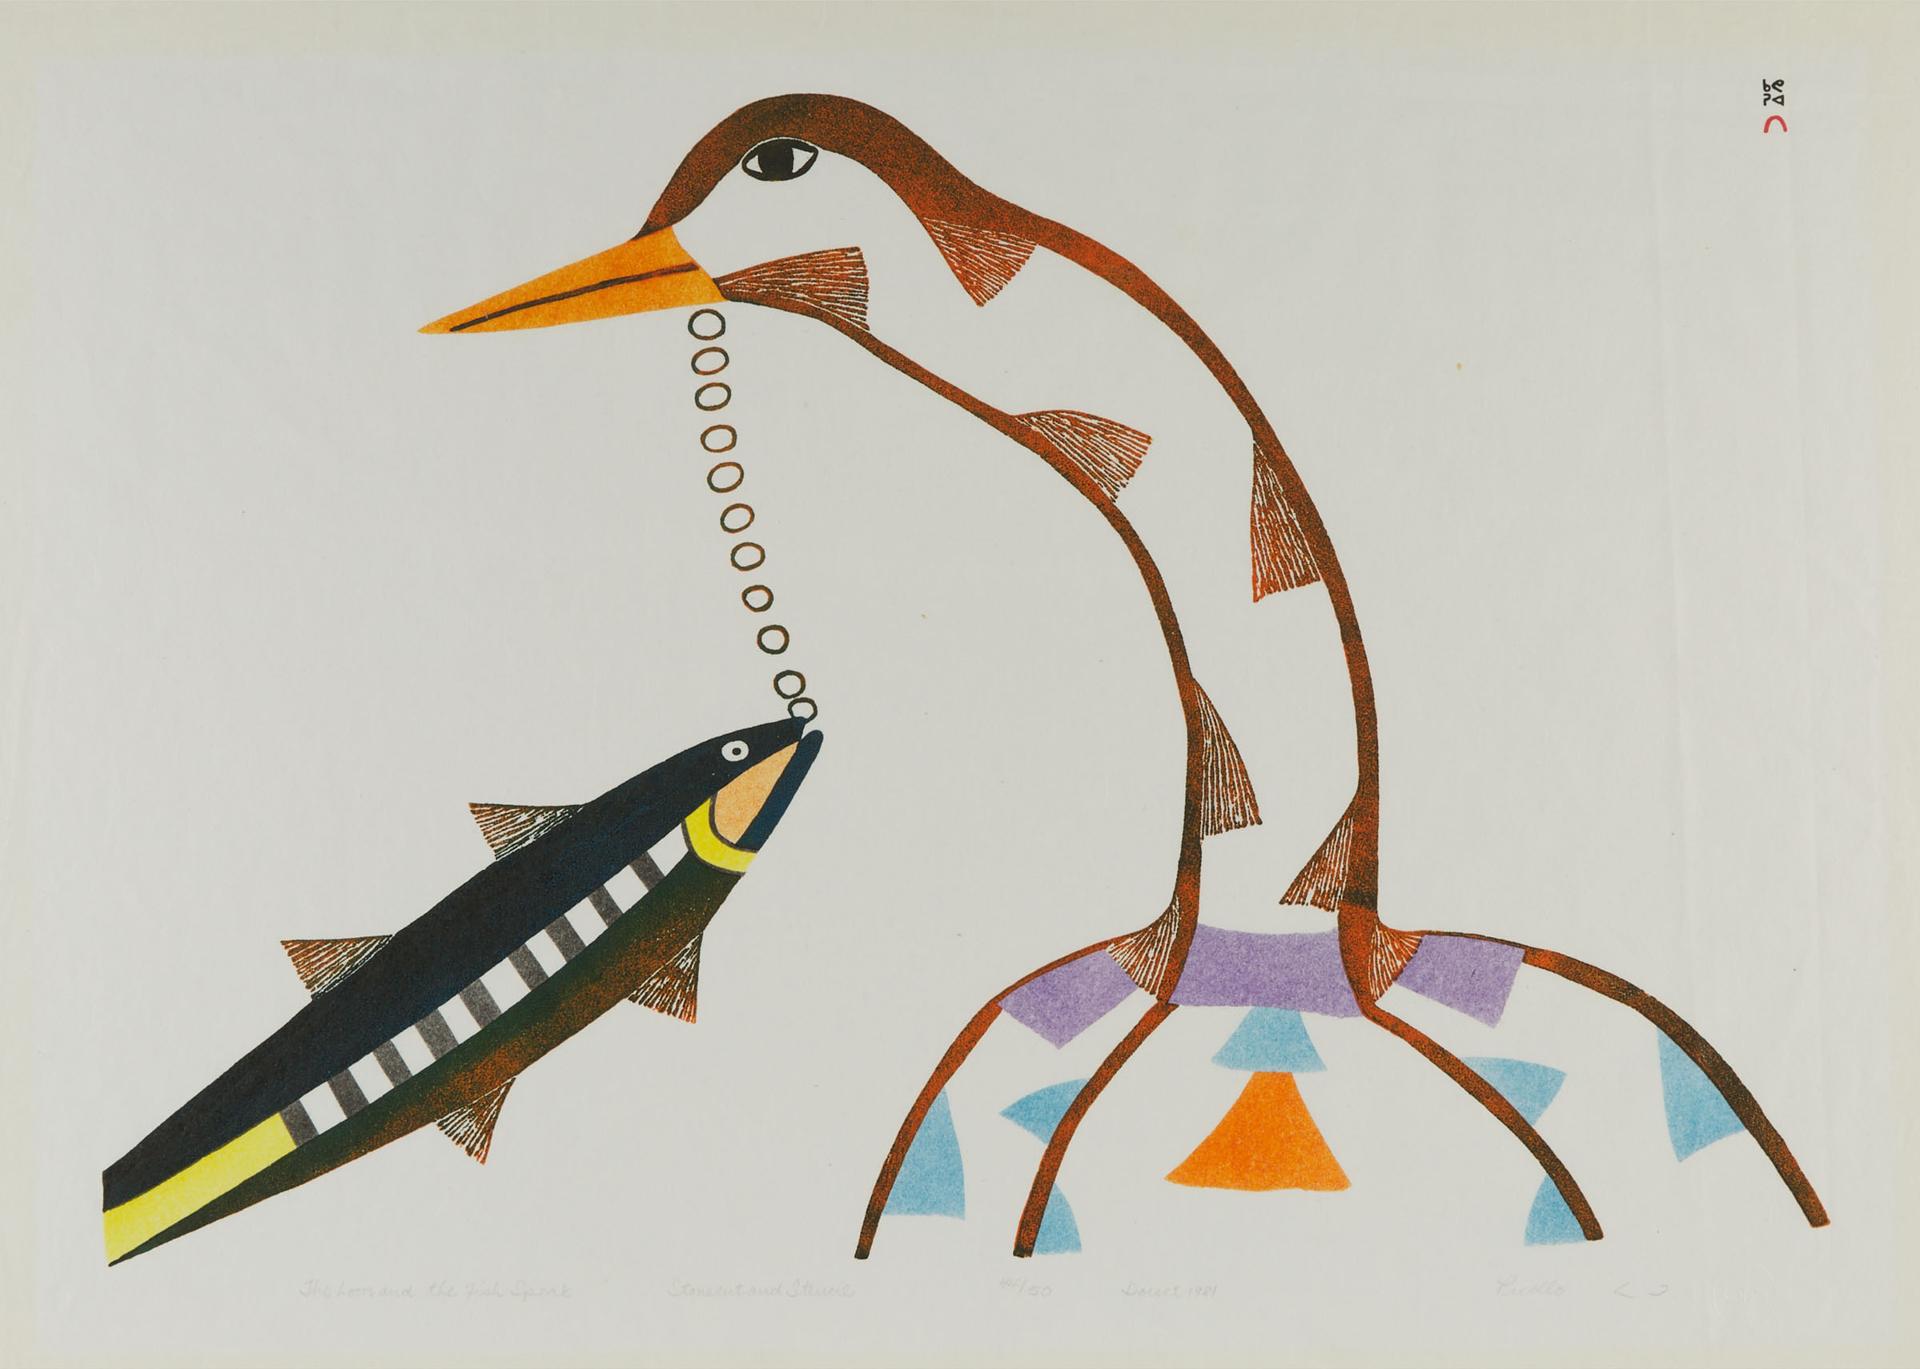 Pudlo Pudlat (1916-1992) - The Loon And The Fish Speak